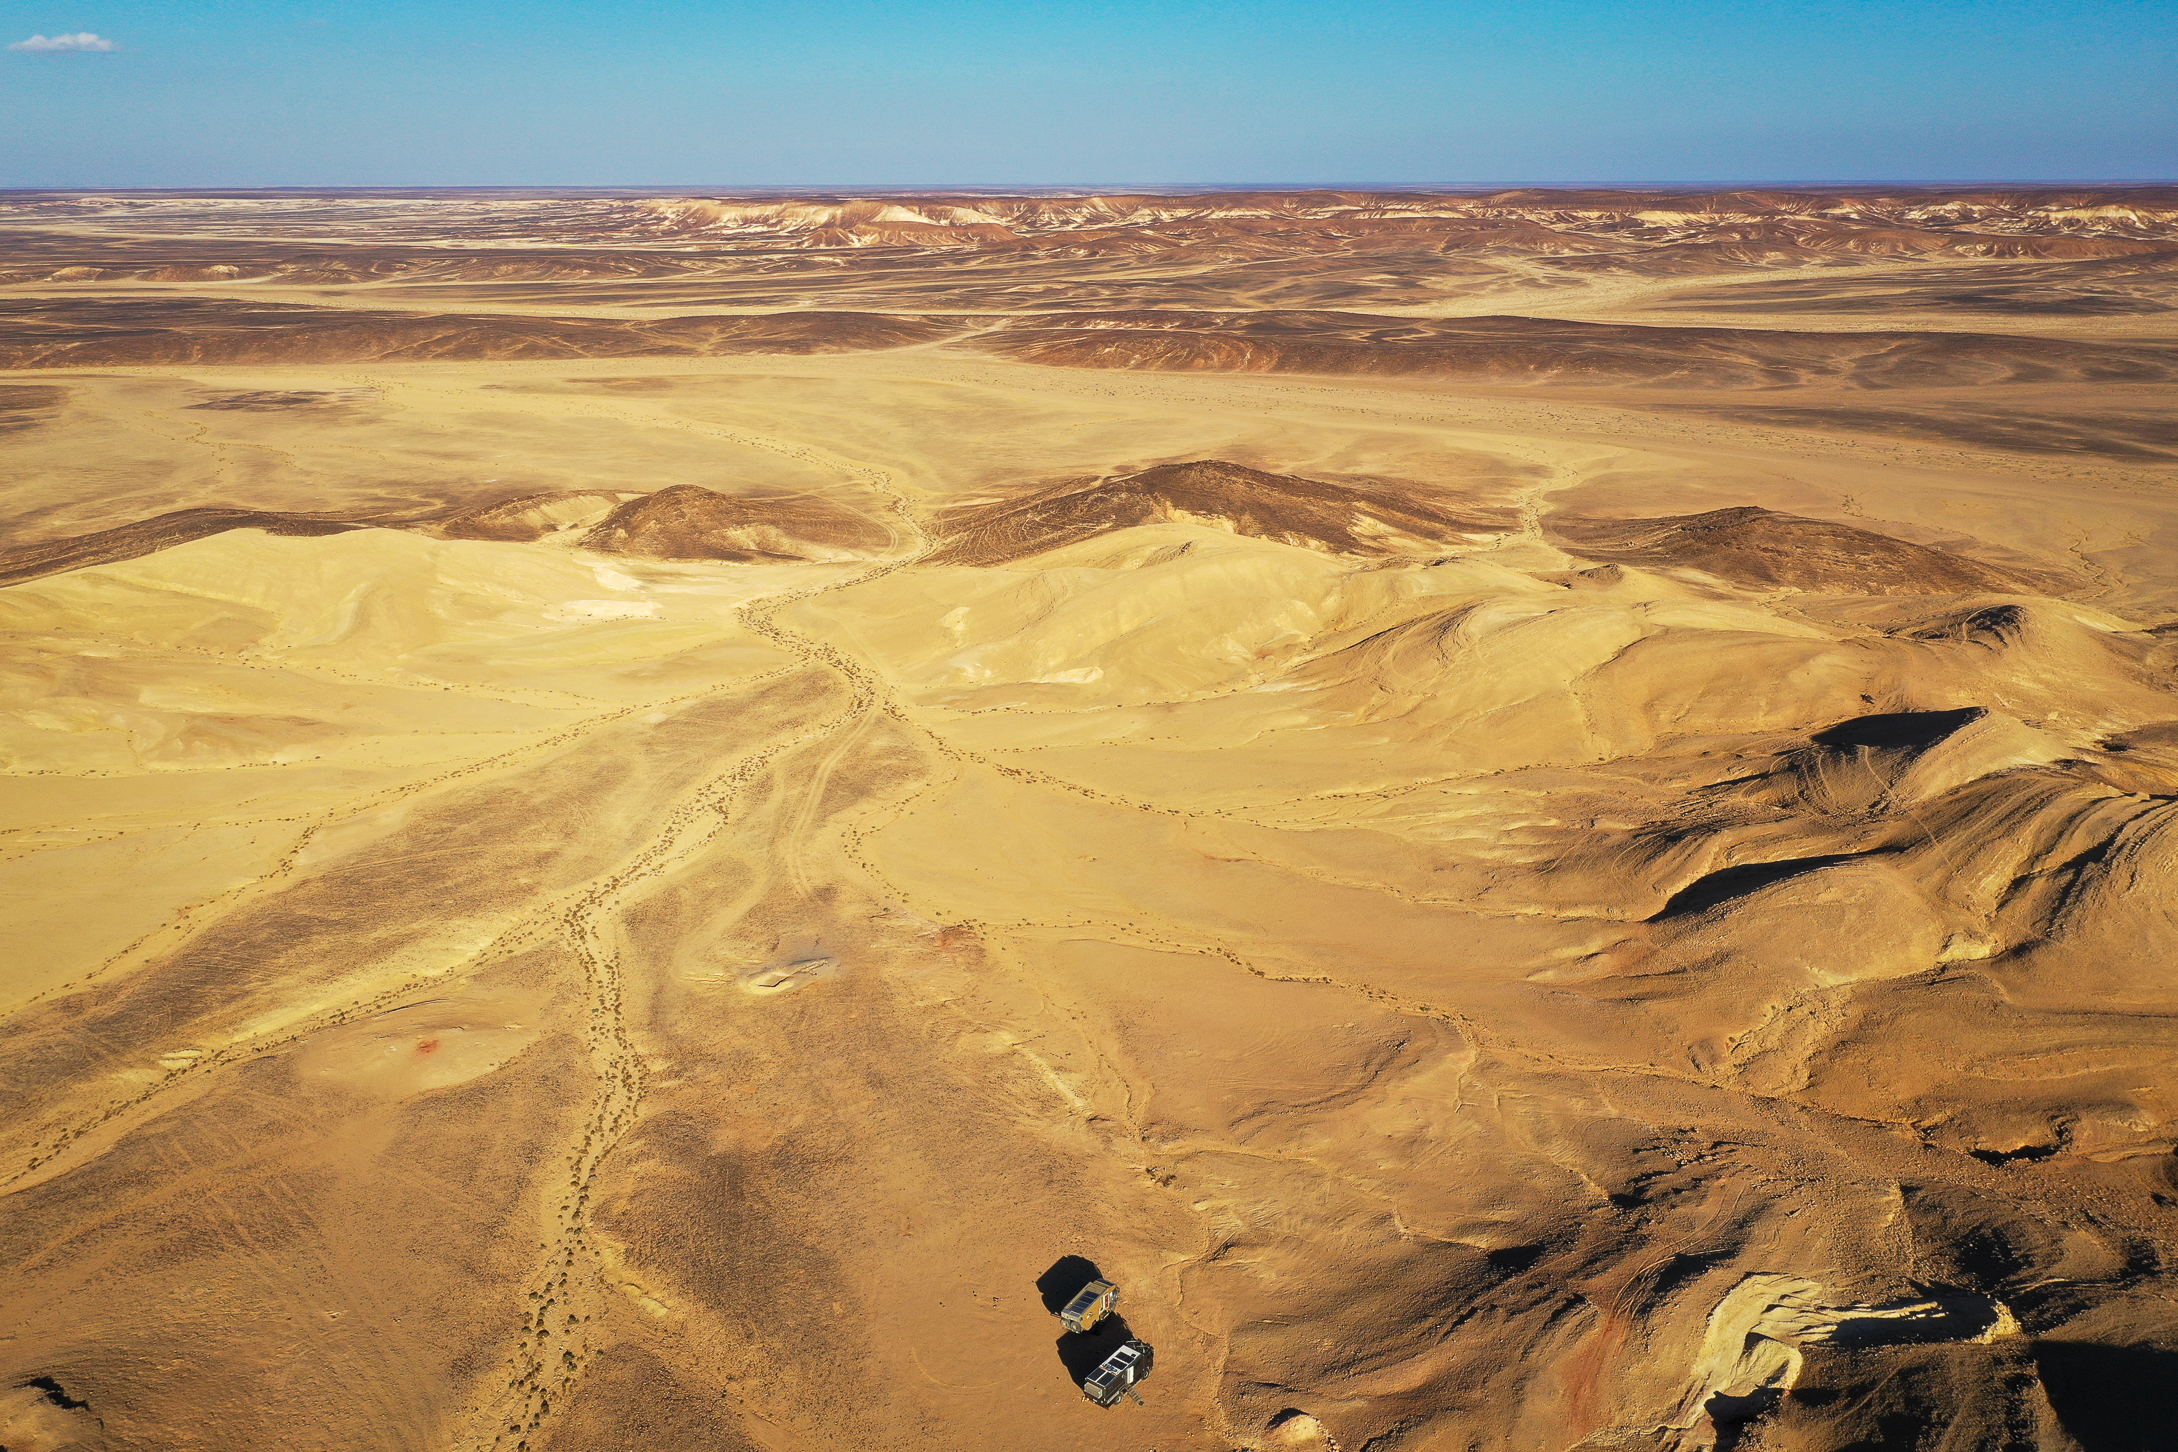 <span  class="uc_style_uc_tiles_grid_image_elementor_uc_items_attribute_title" style="color:#ffffff;">With the trucks in the 'Jebel Waqf Crater'</span>